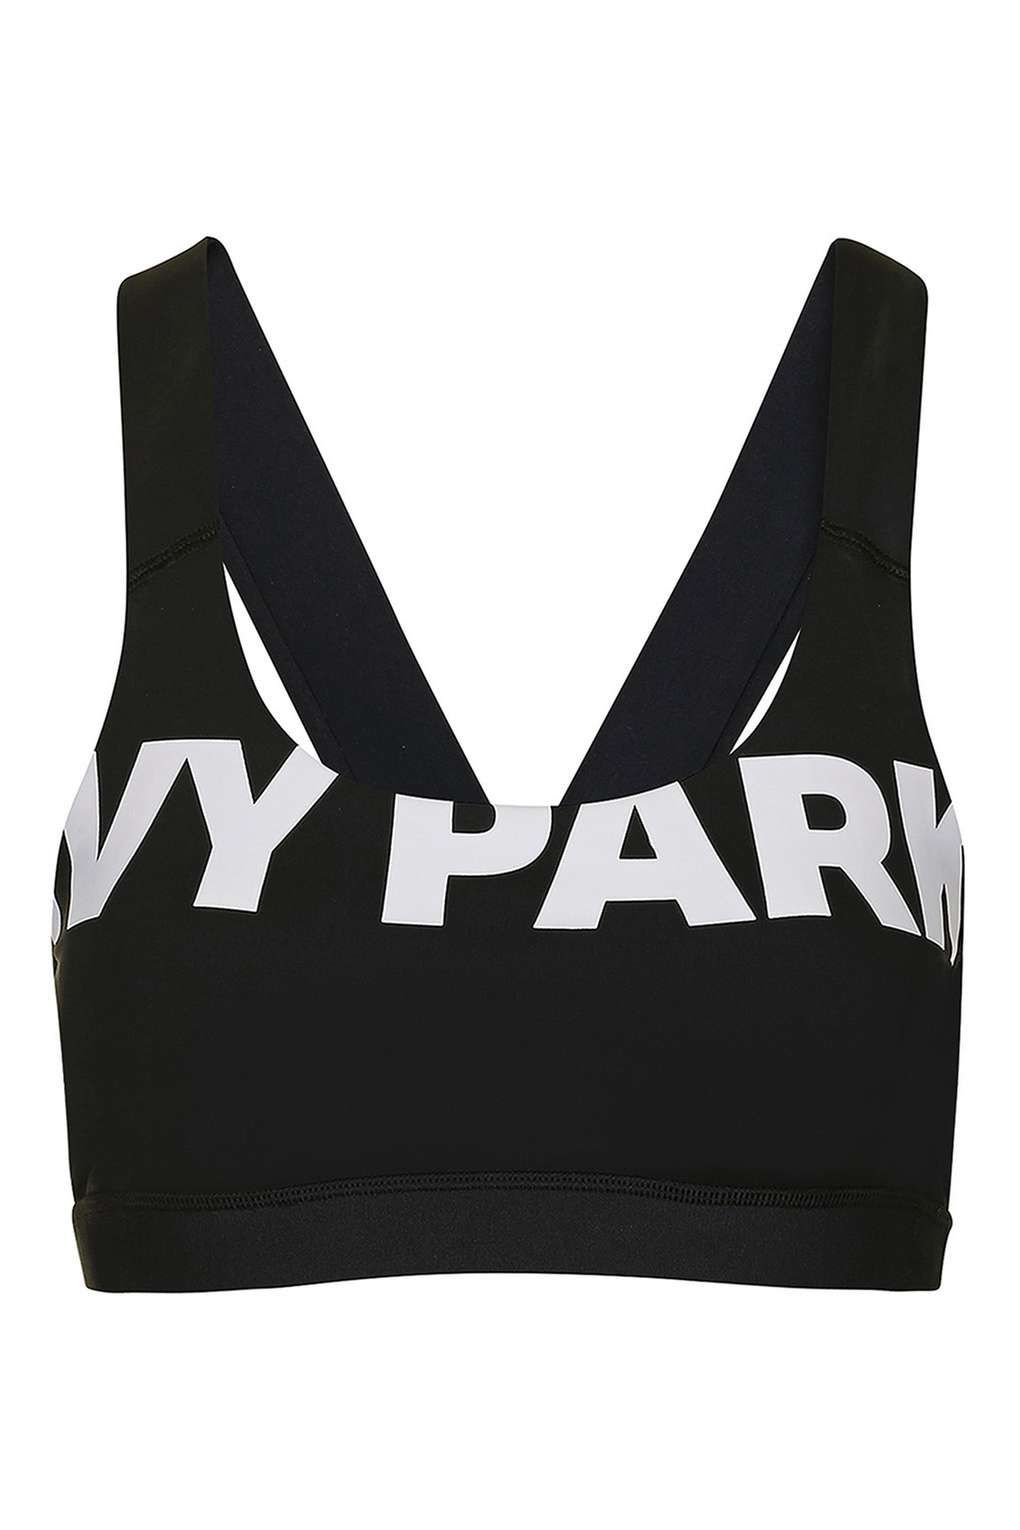 First Look: Beyonce's Ivy Park collection for Topshop arrives in Ireland  and it's surprisingly affordable